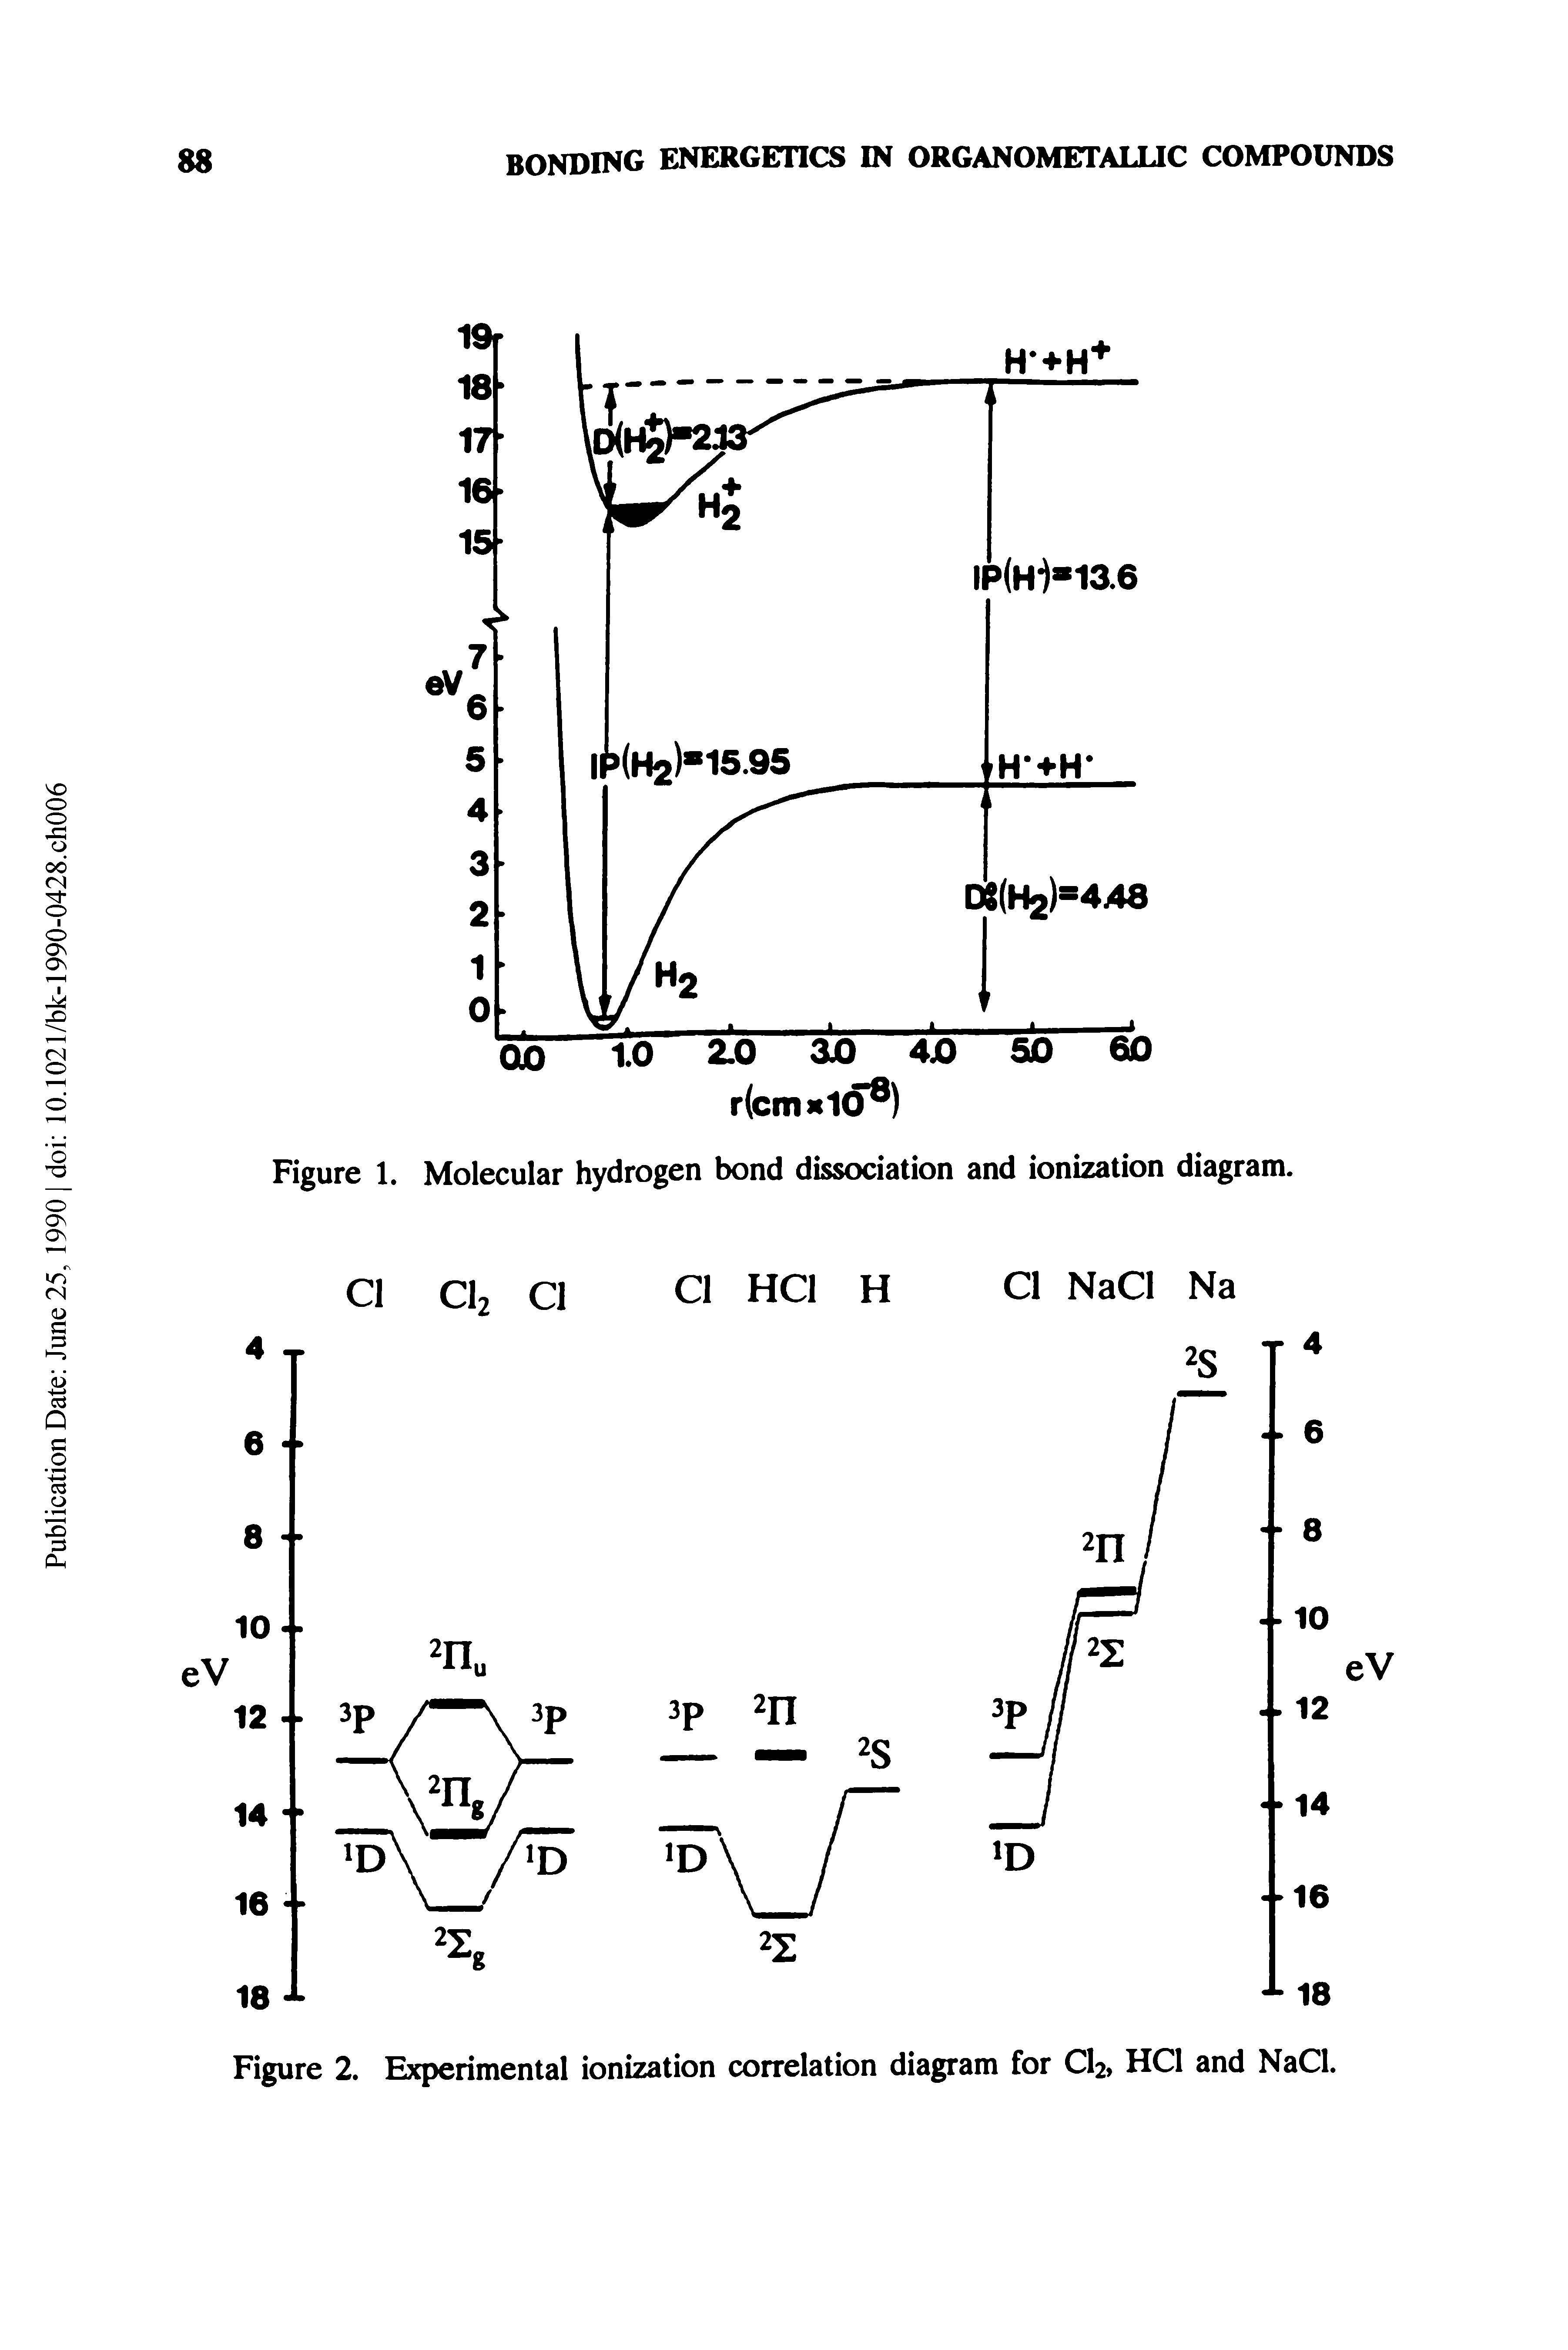 Figure 2. Experimental ionization correlation diagram for CI2, HCl and NaCl.